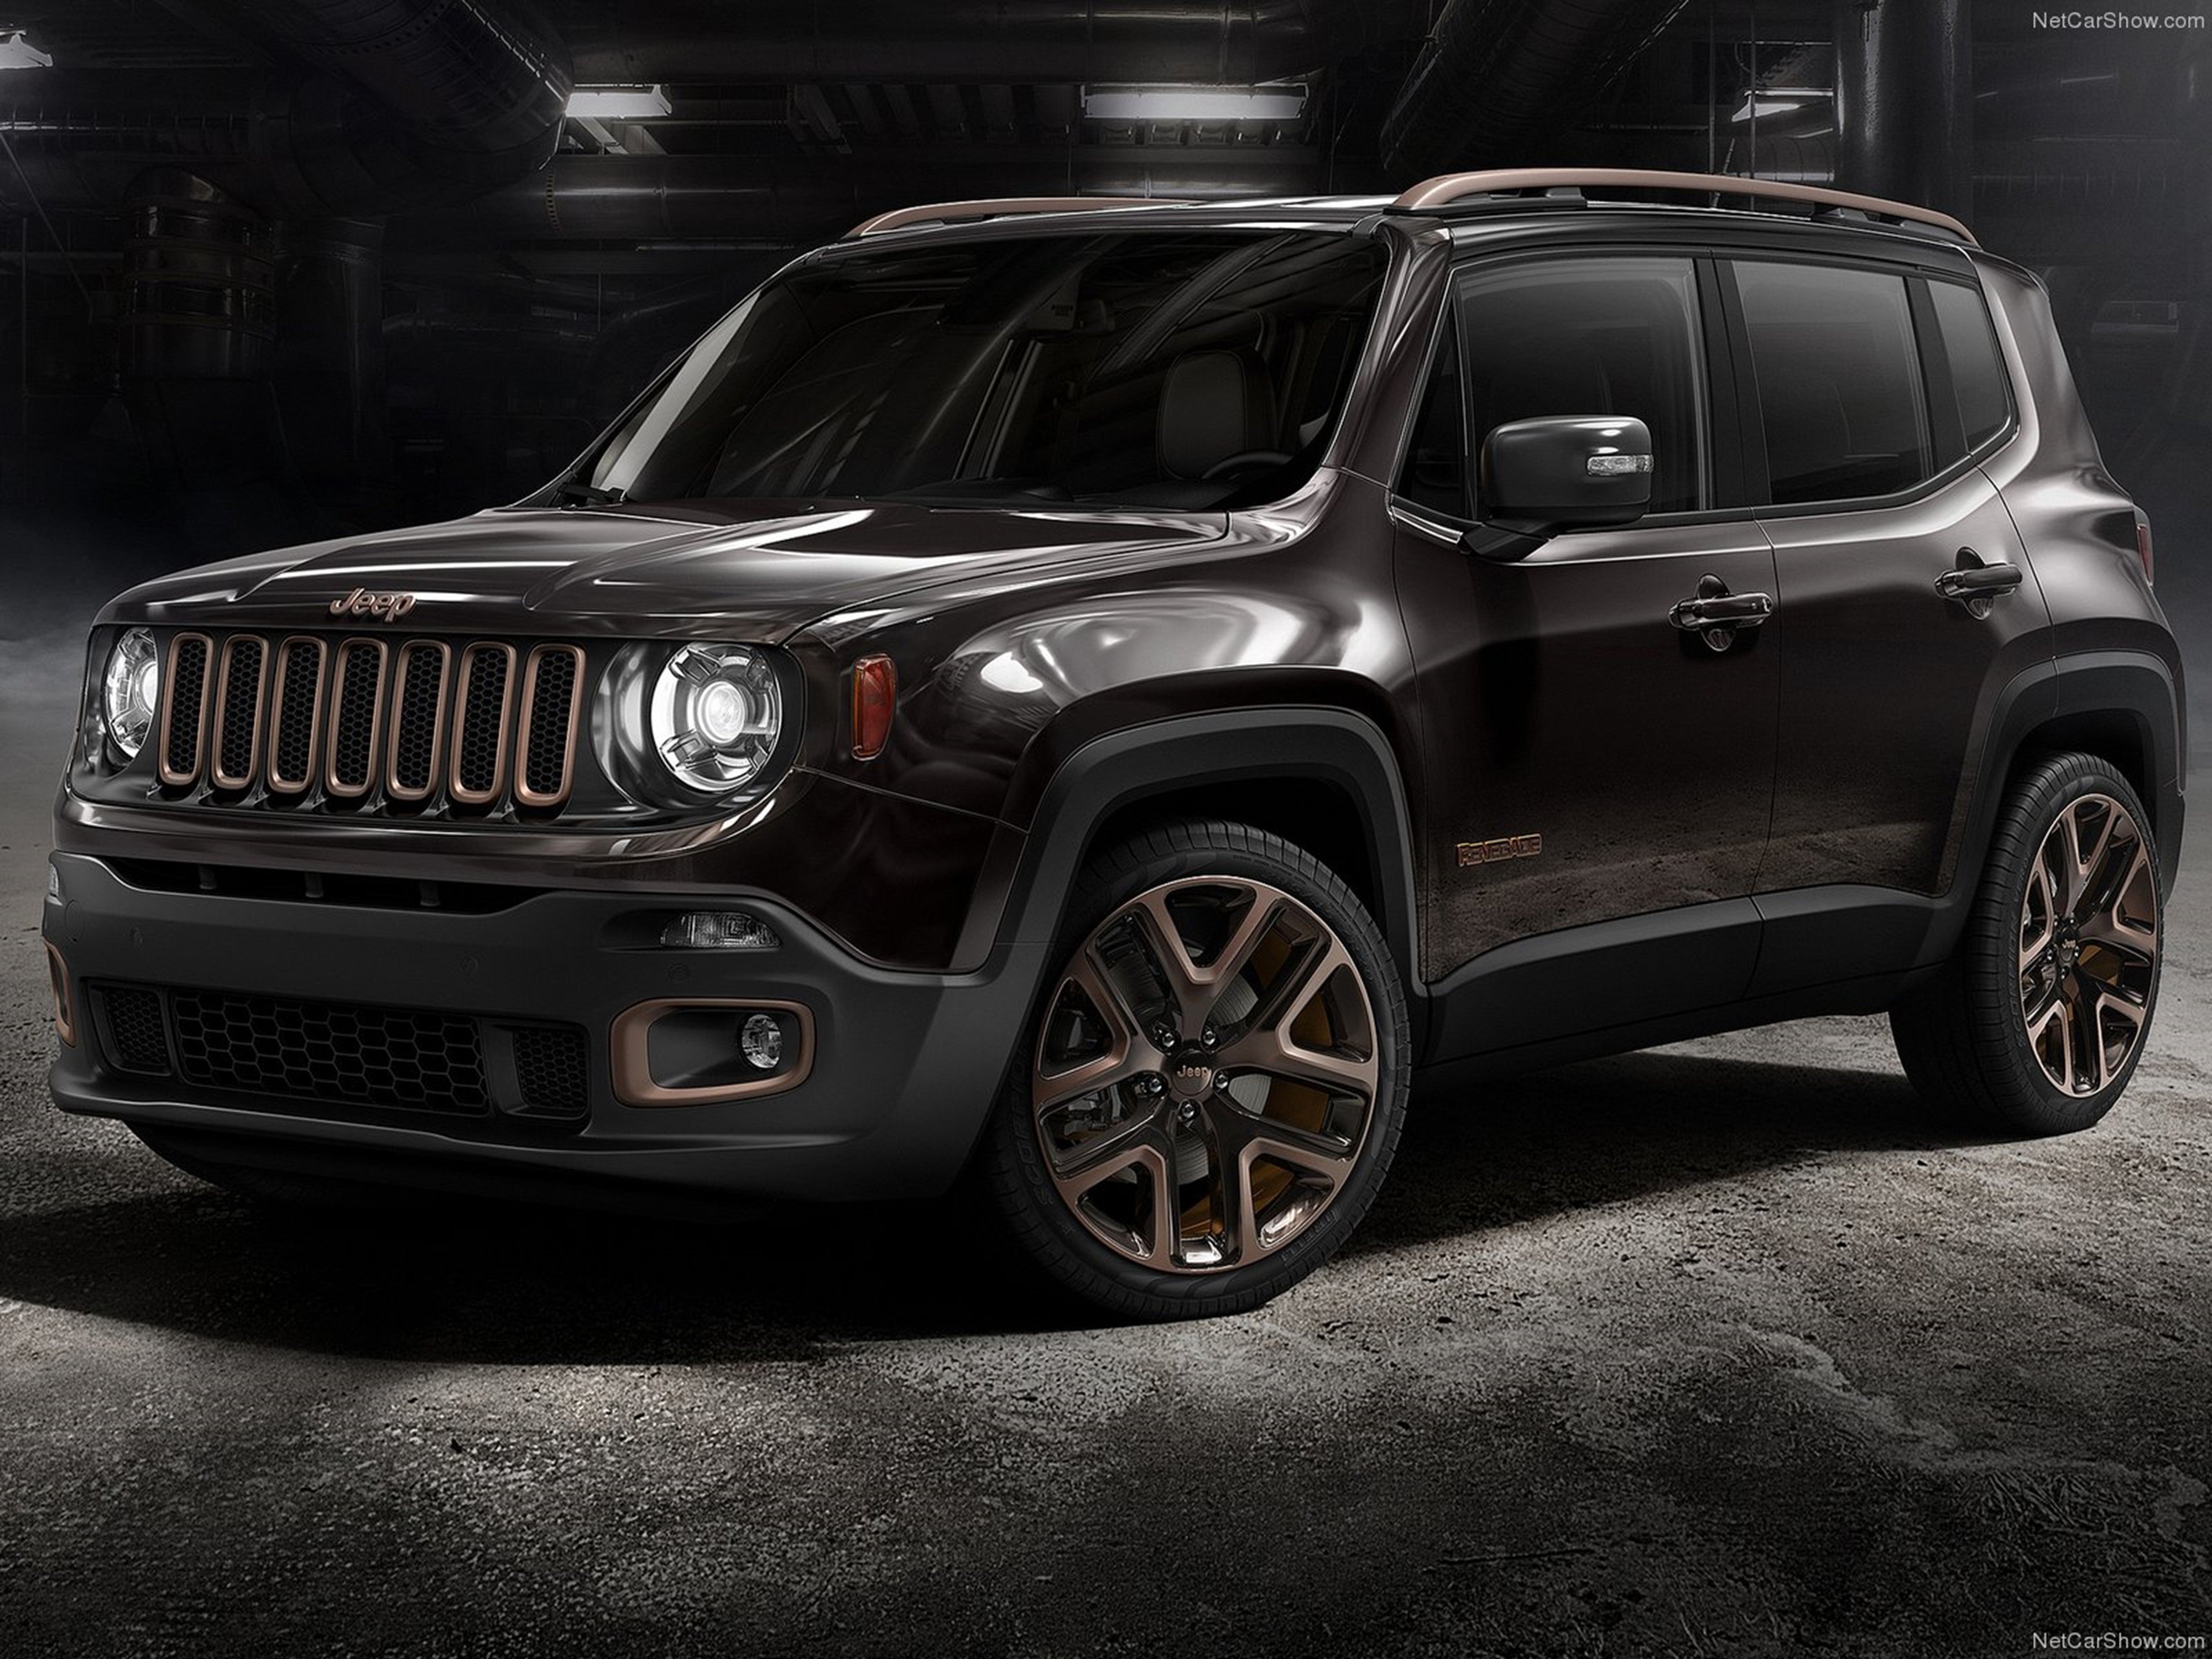 Jeep Renegade Zi You Xia Concept 14 Wallpaper 01 4000x3000 Wallpapers Hd Desktop And Mobile Backgrounds